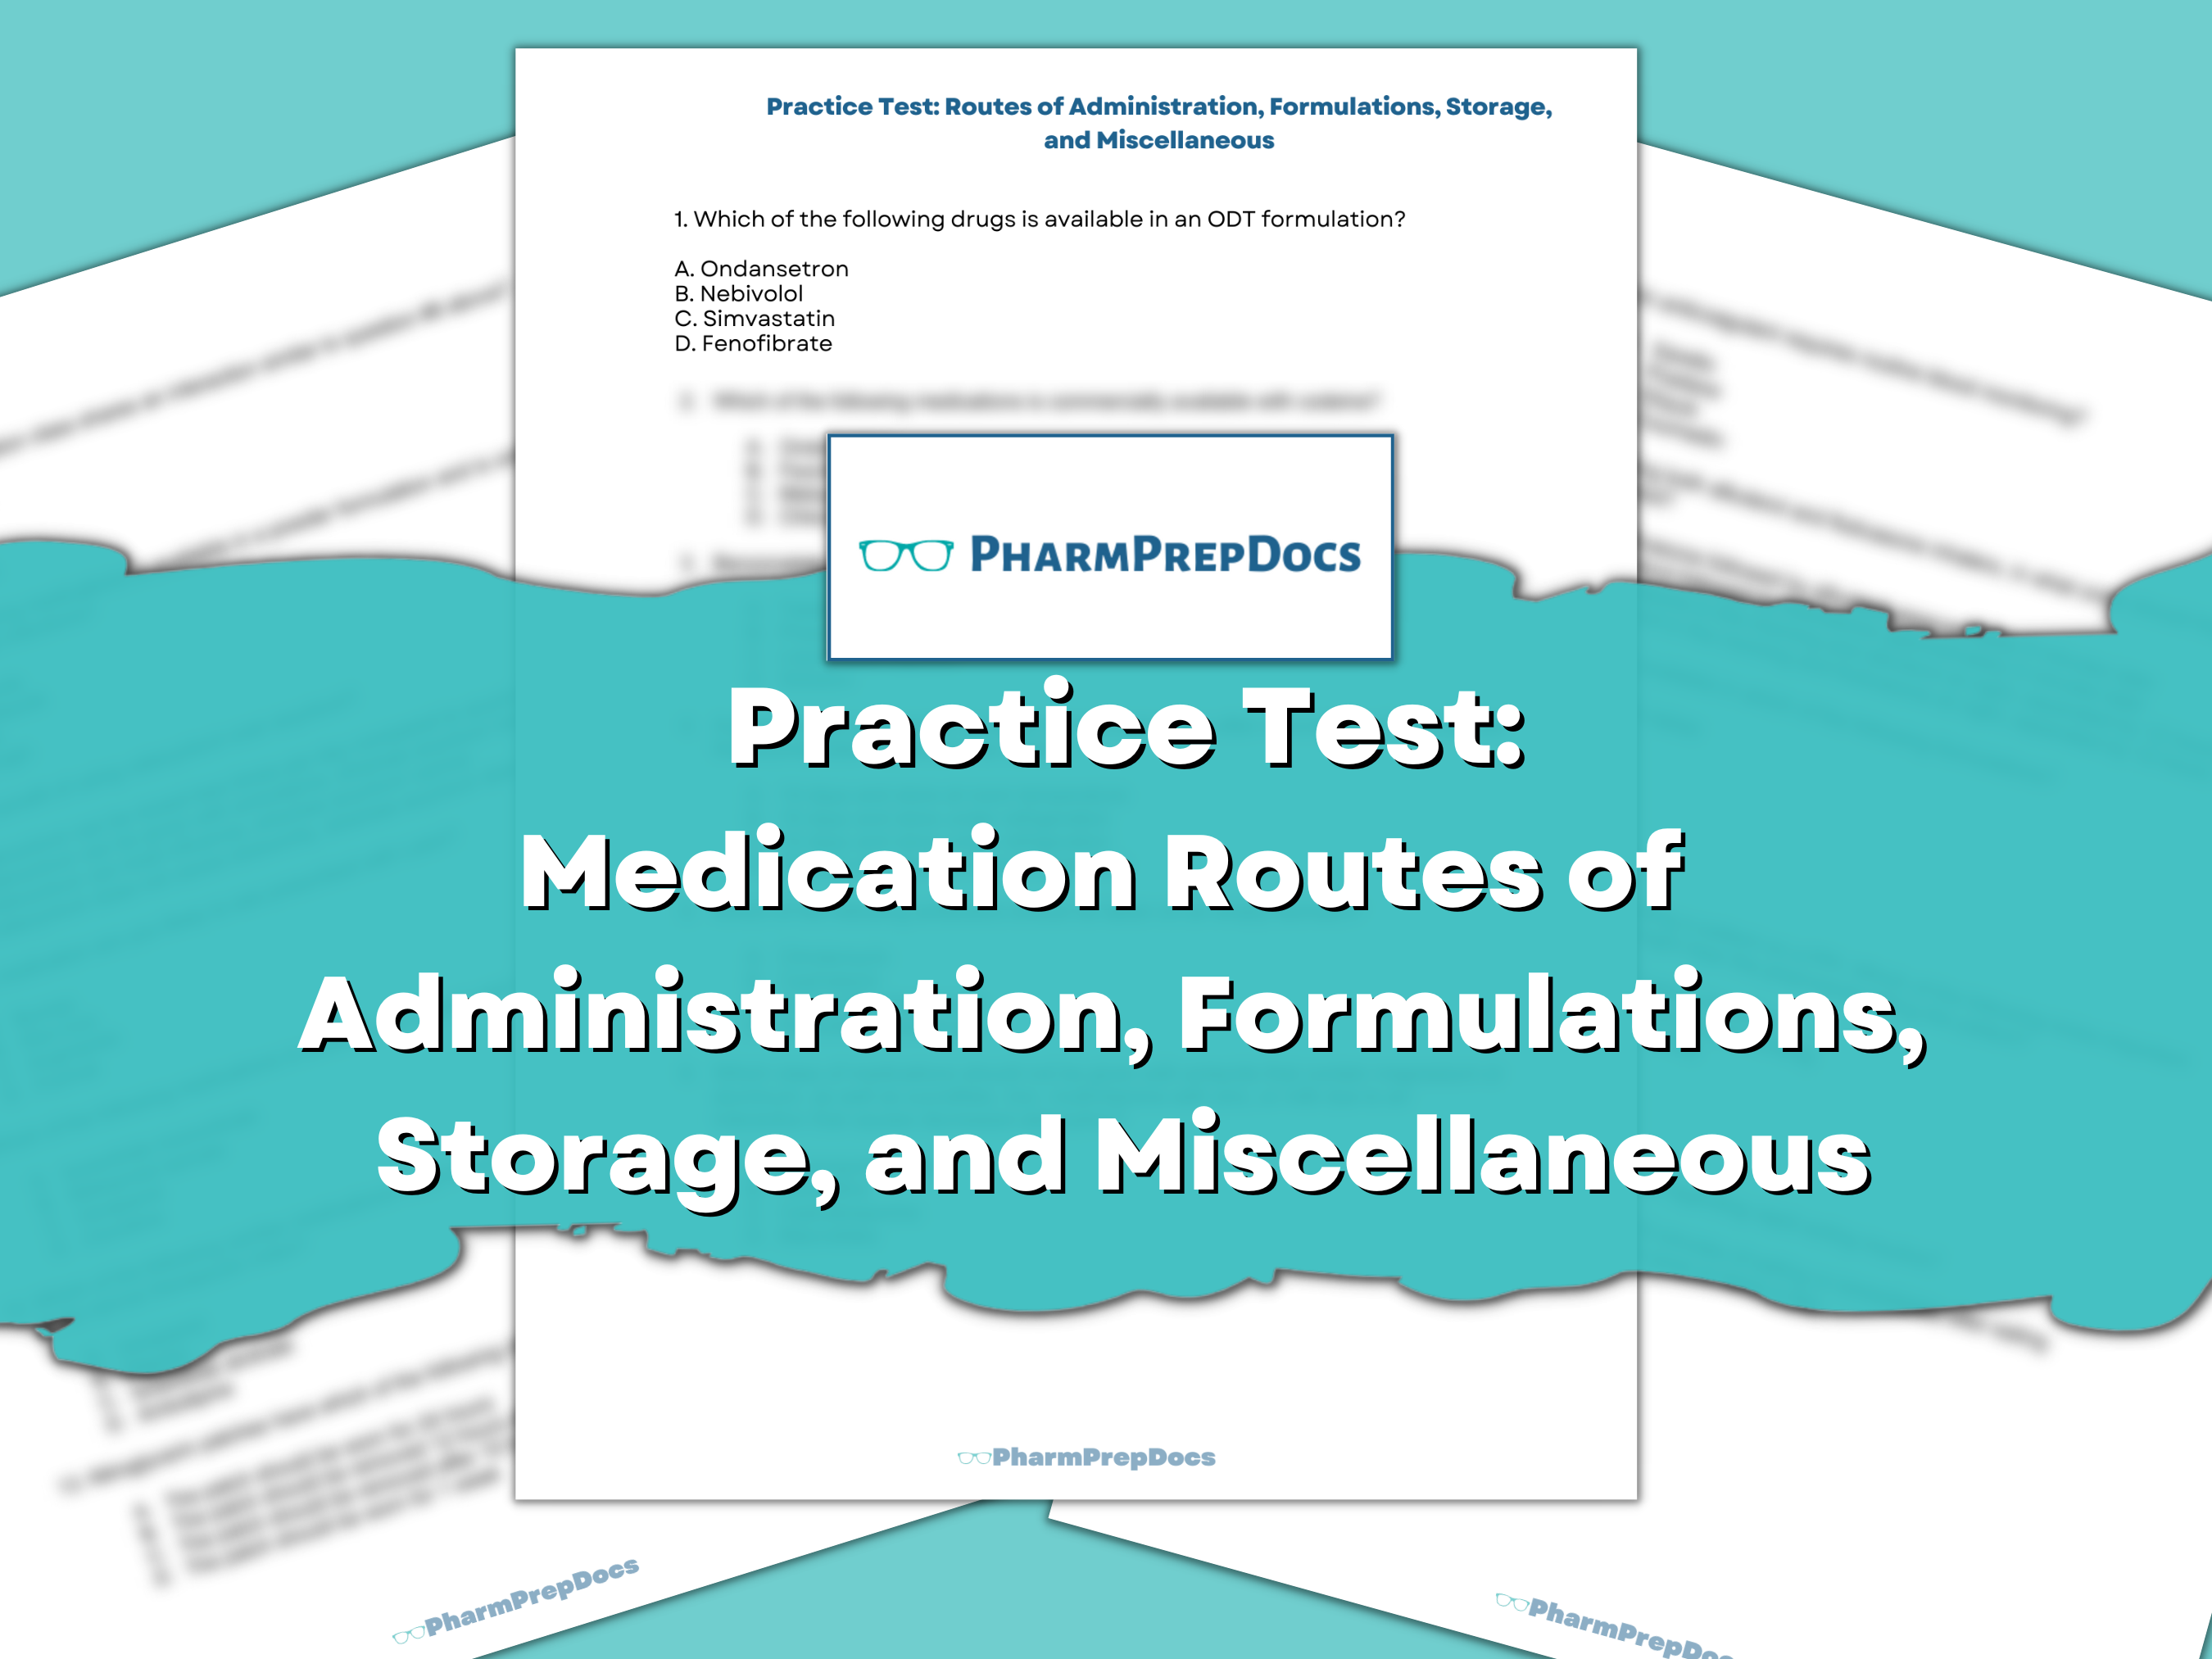 Practice Test: Routes of Administration, Formulations, Storage, and Miscellaneous